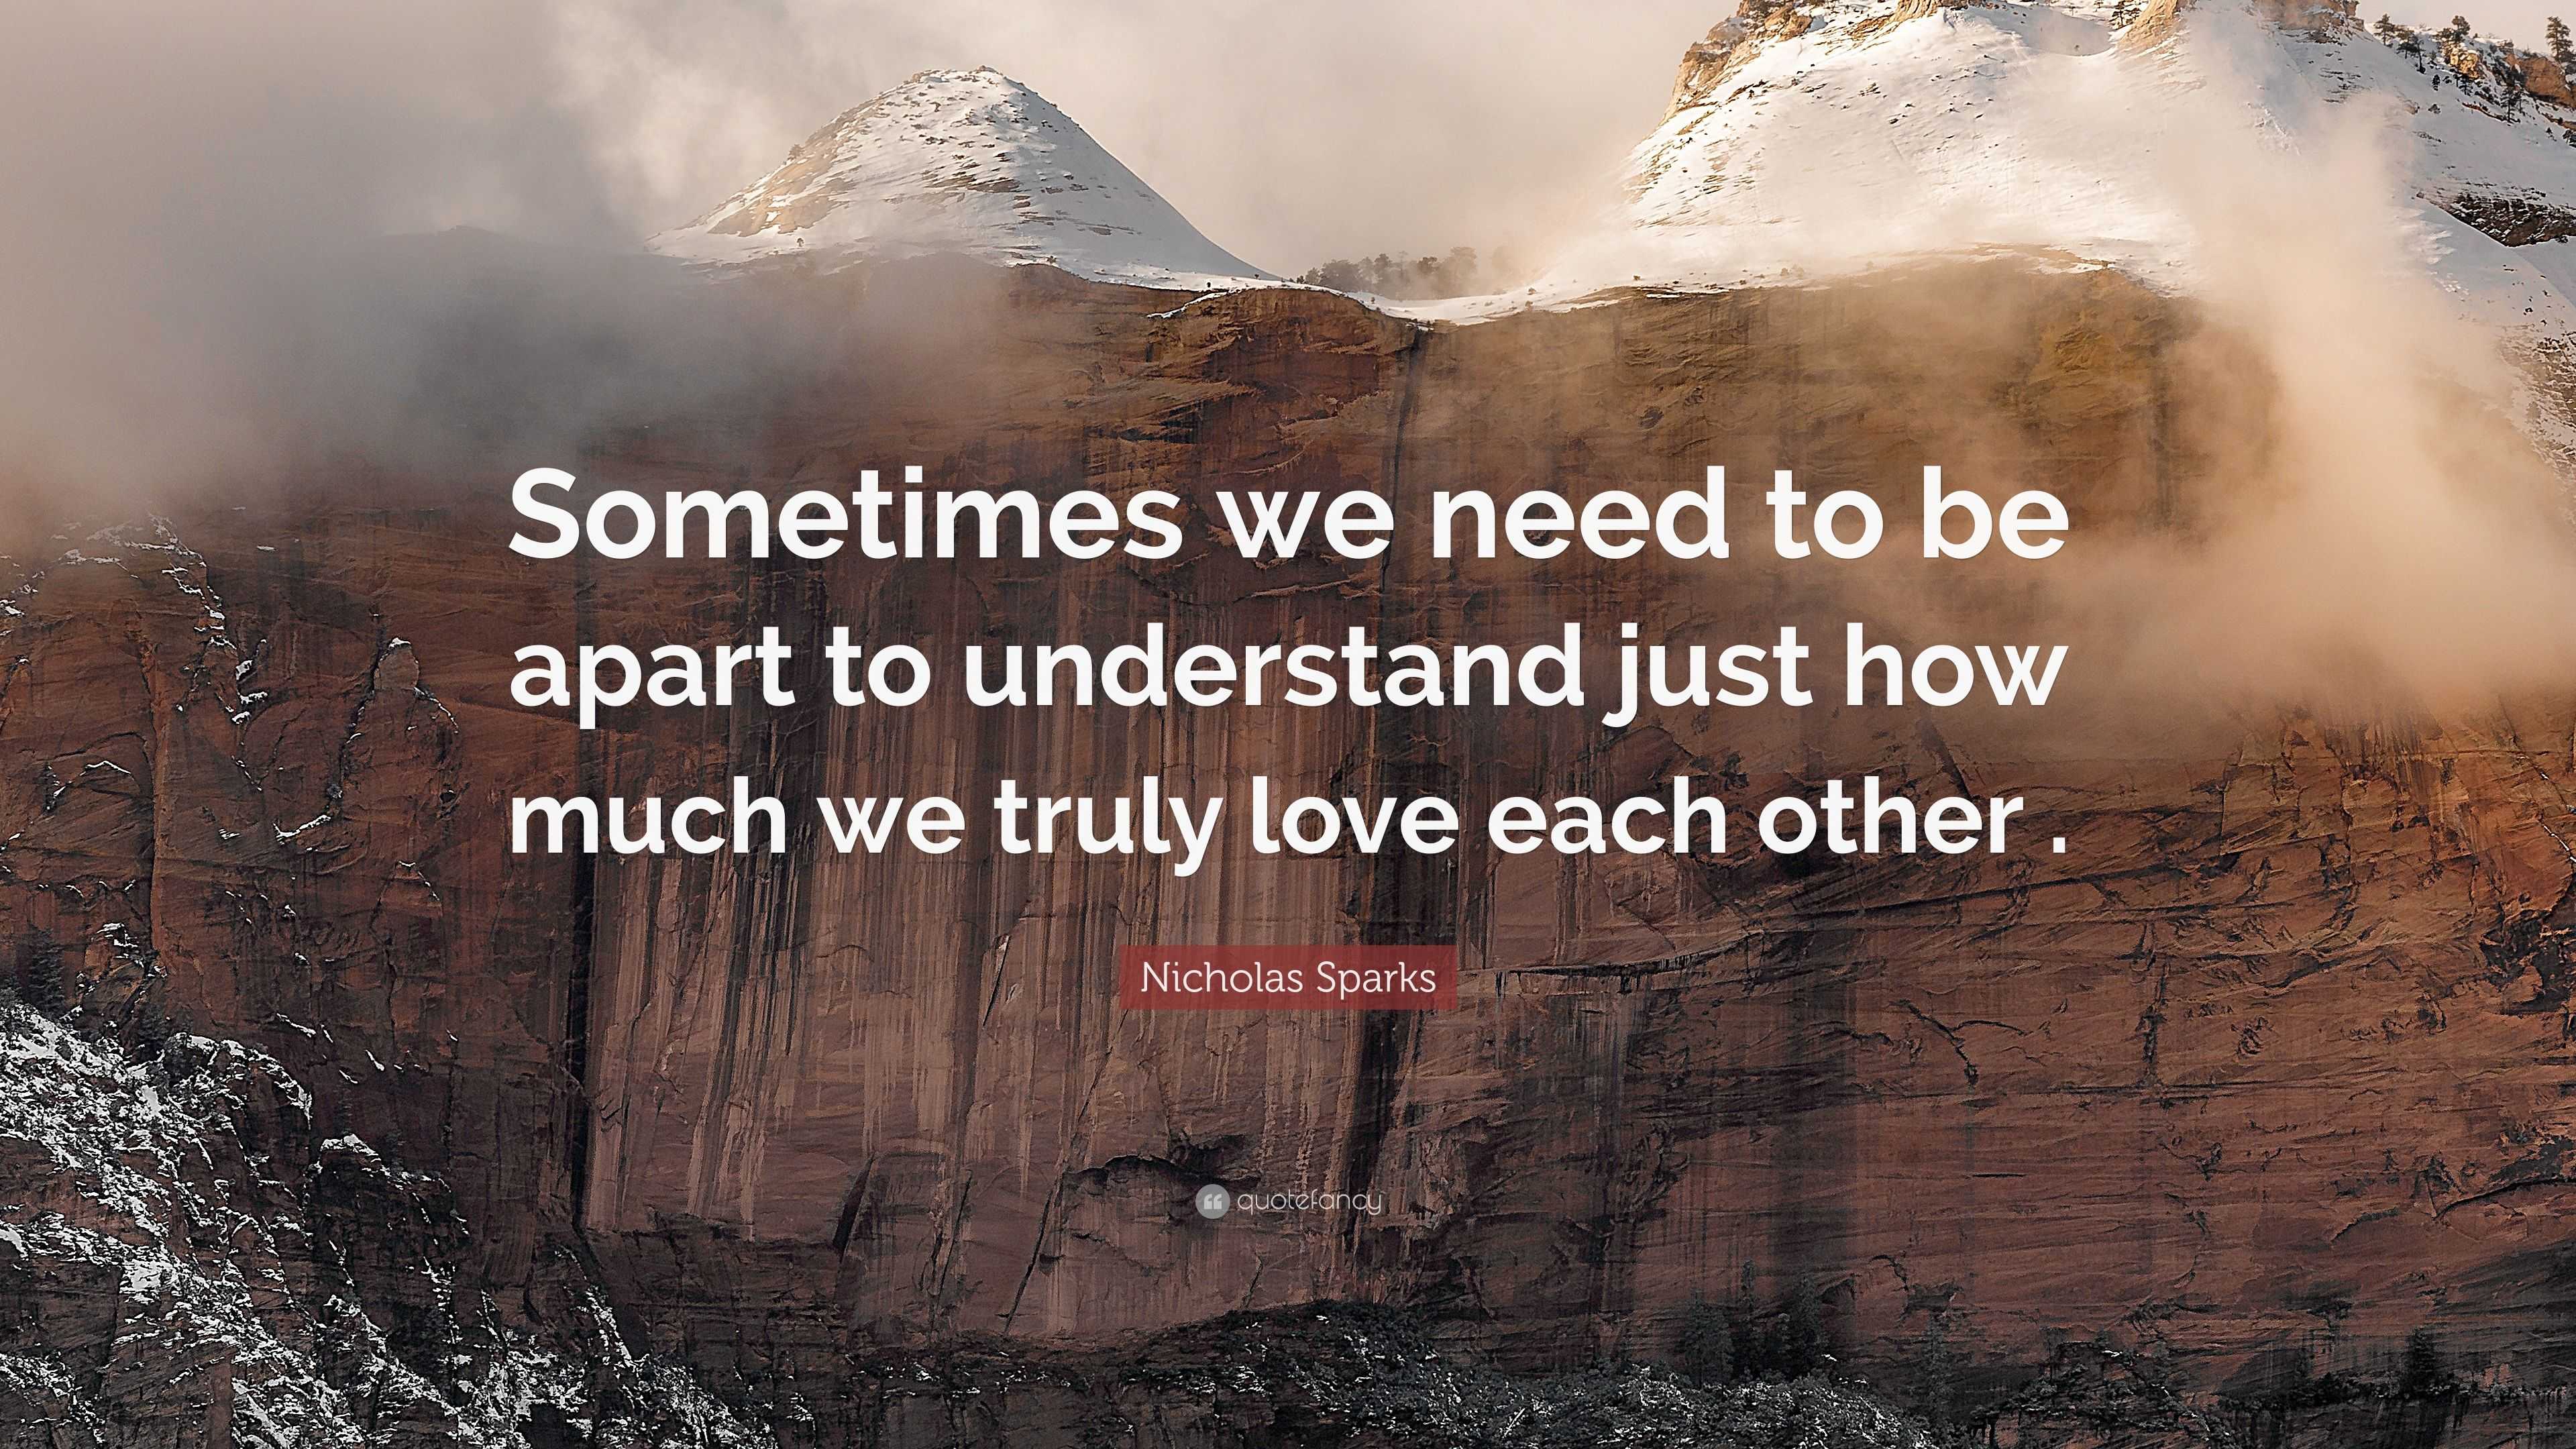 Nicholas Sparks Quote: “Sometimes we need to be apart to understand ...